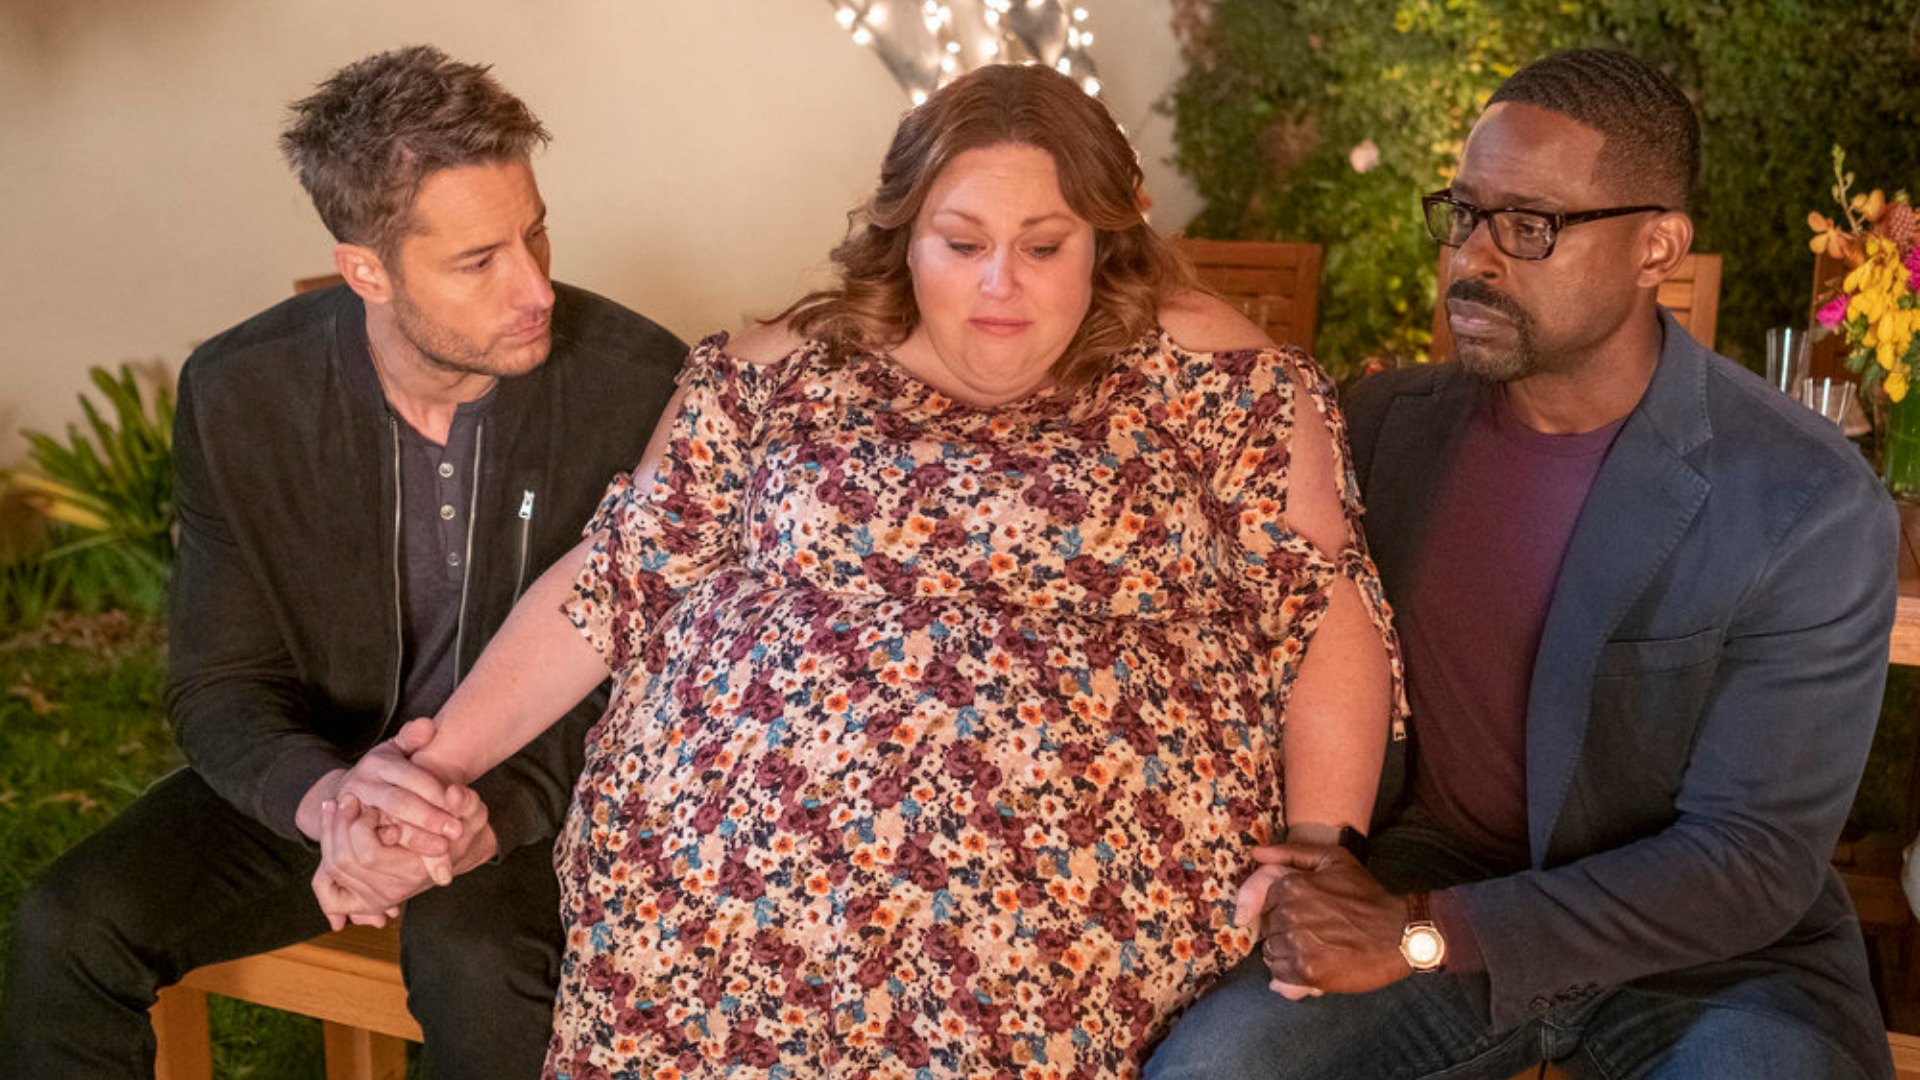 Justin Hartley as Kevin and Sterling K. Brown as Randall comfort Chrissy Metz as Kate in ‘This Is Us’ Season 6 Episode 11